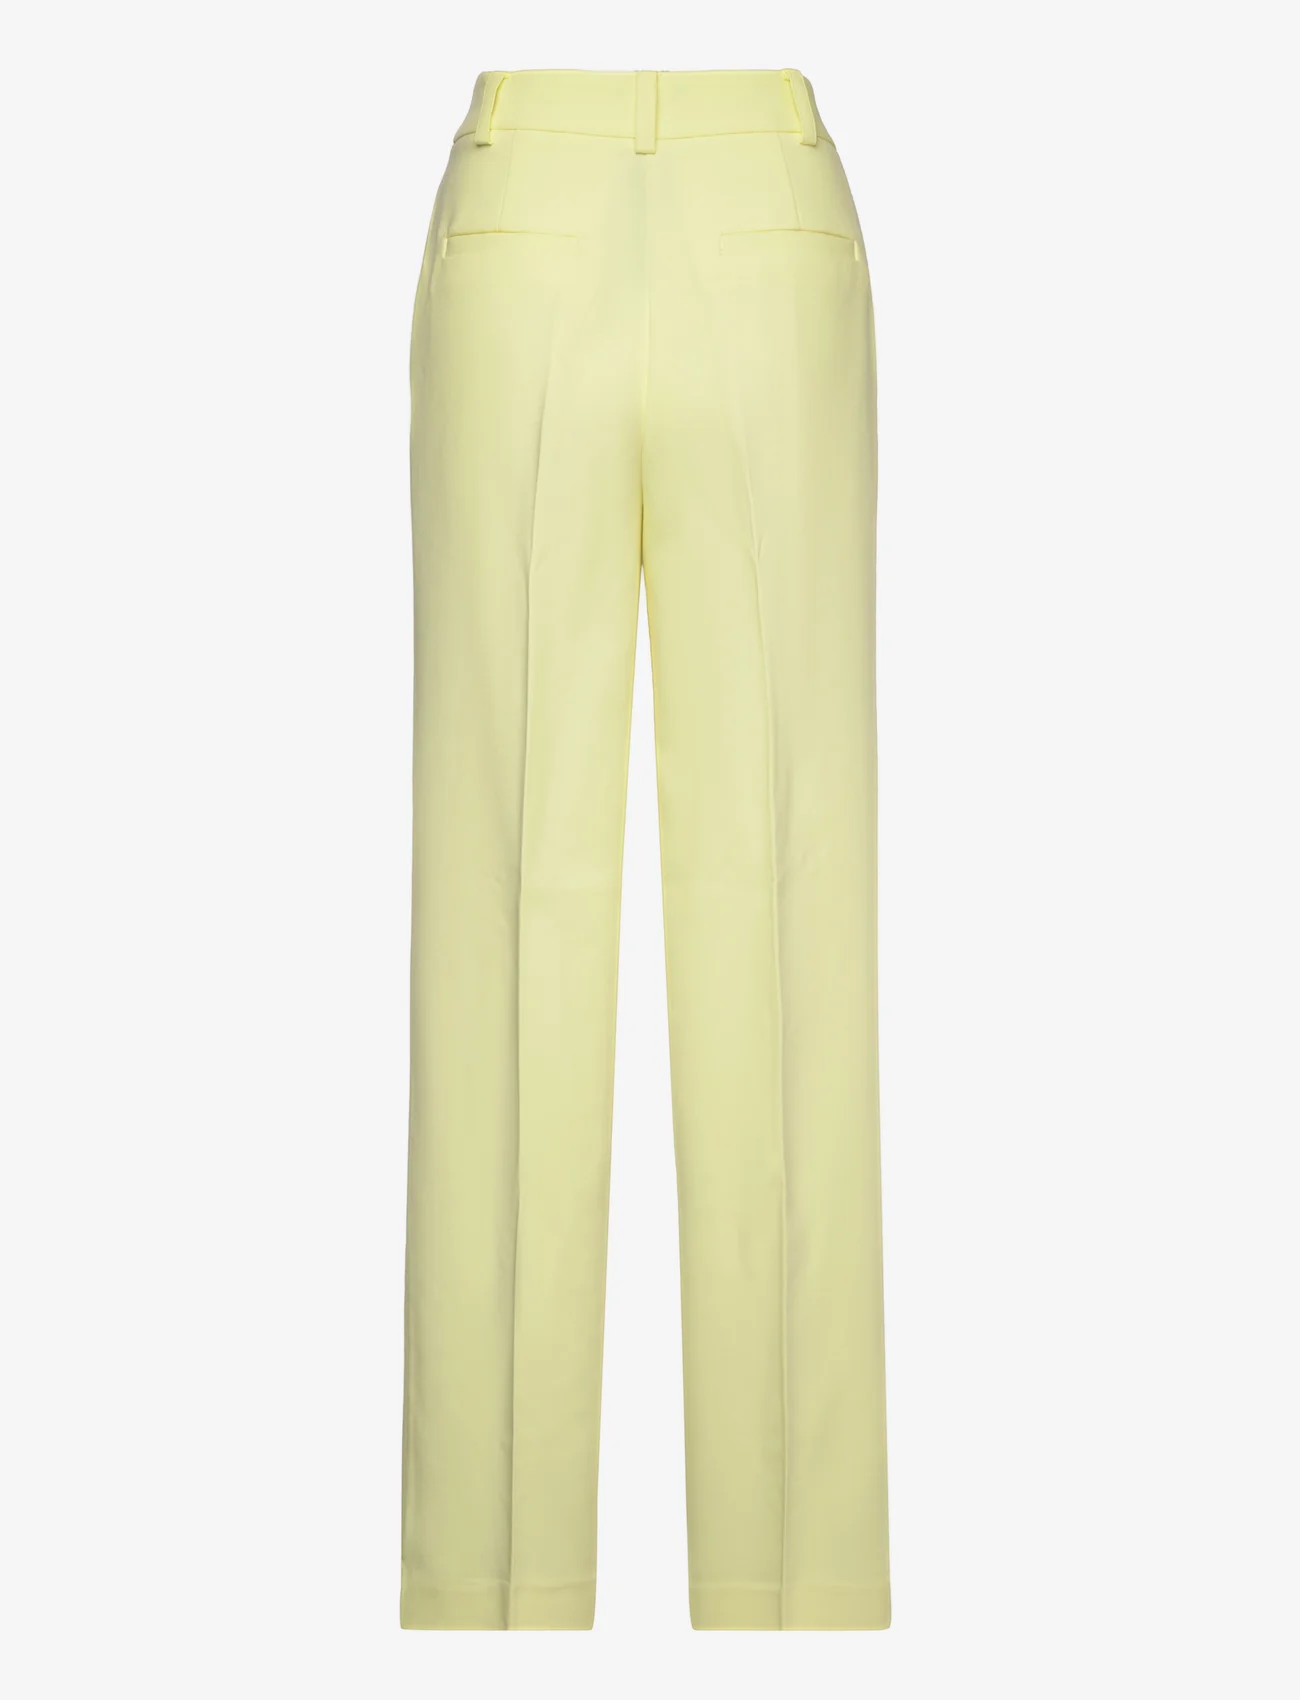 Modström - Gale pants - peoriided outlet-hindadega - yellow pear - 1